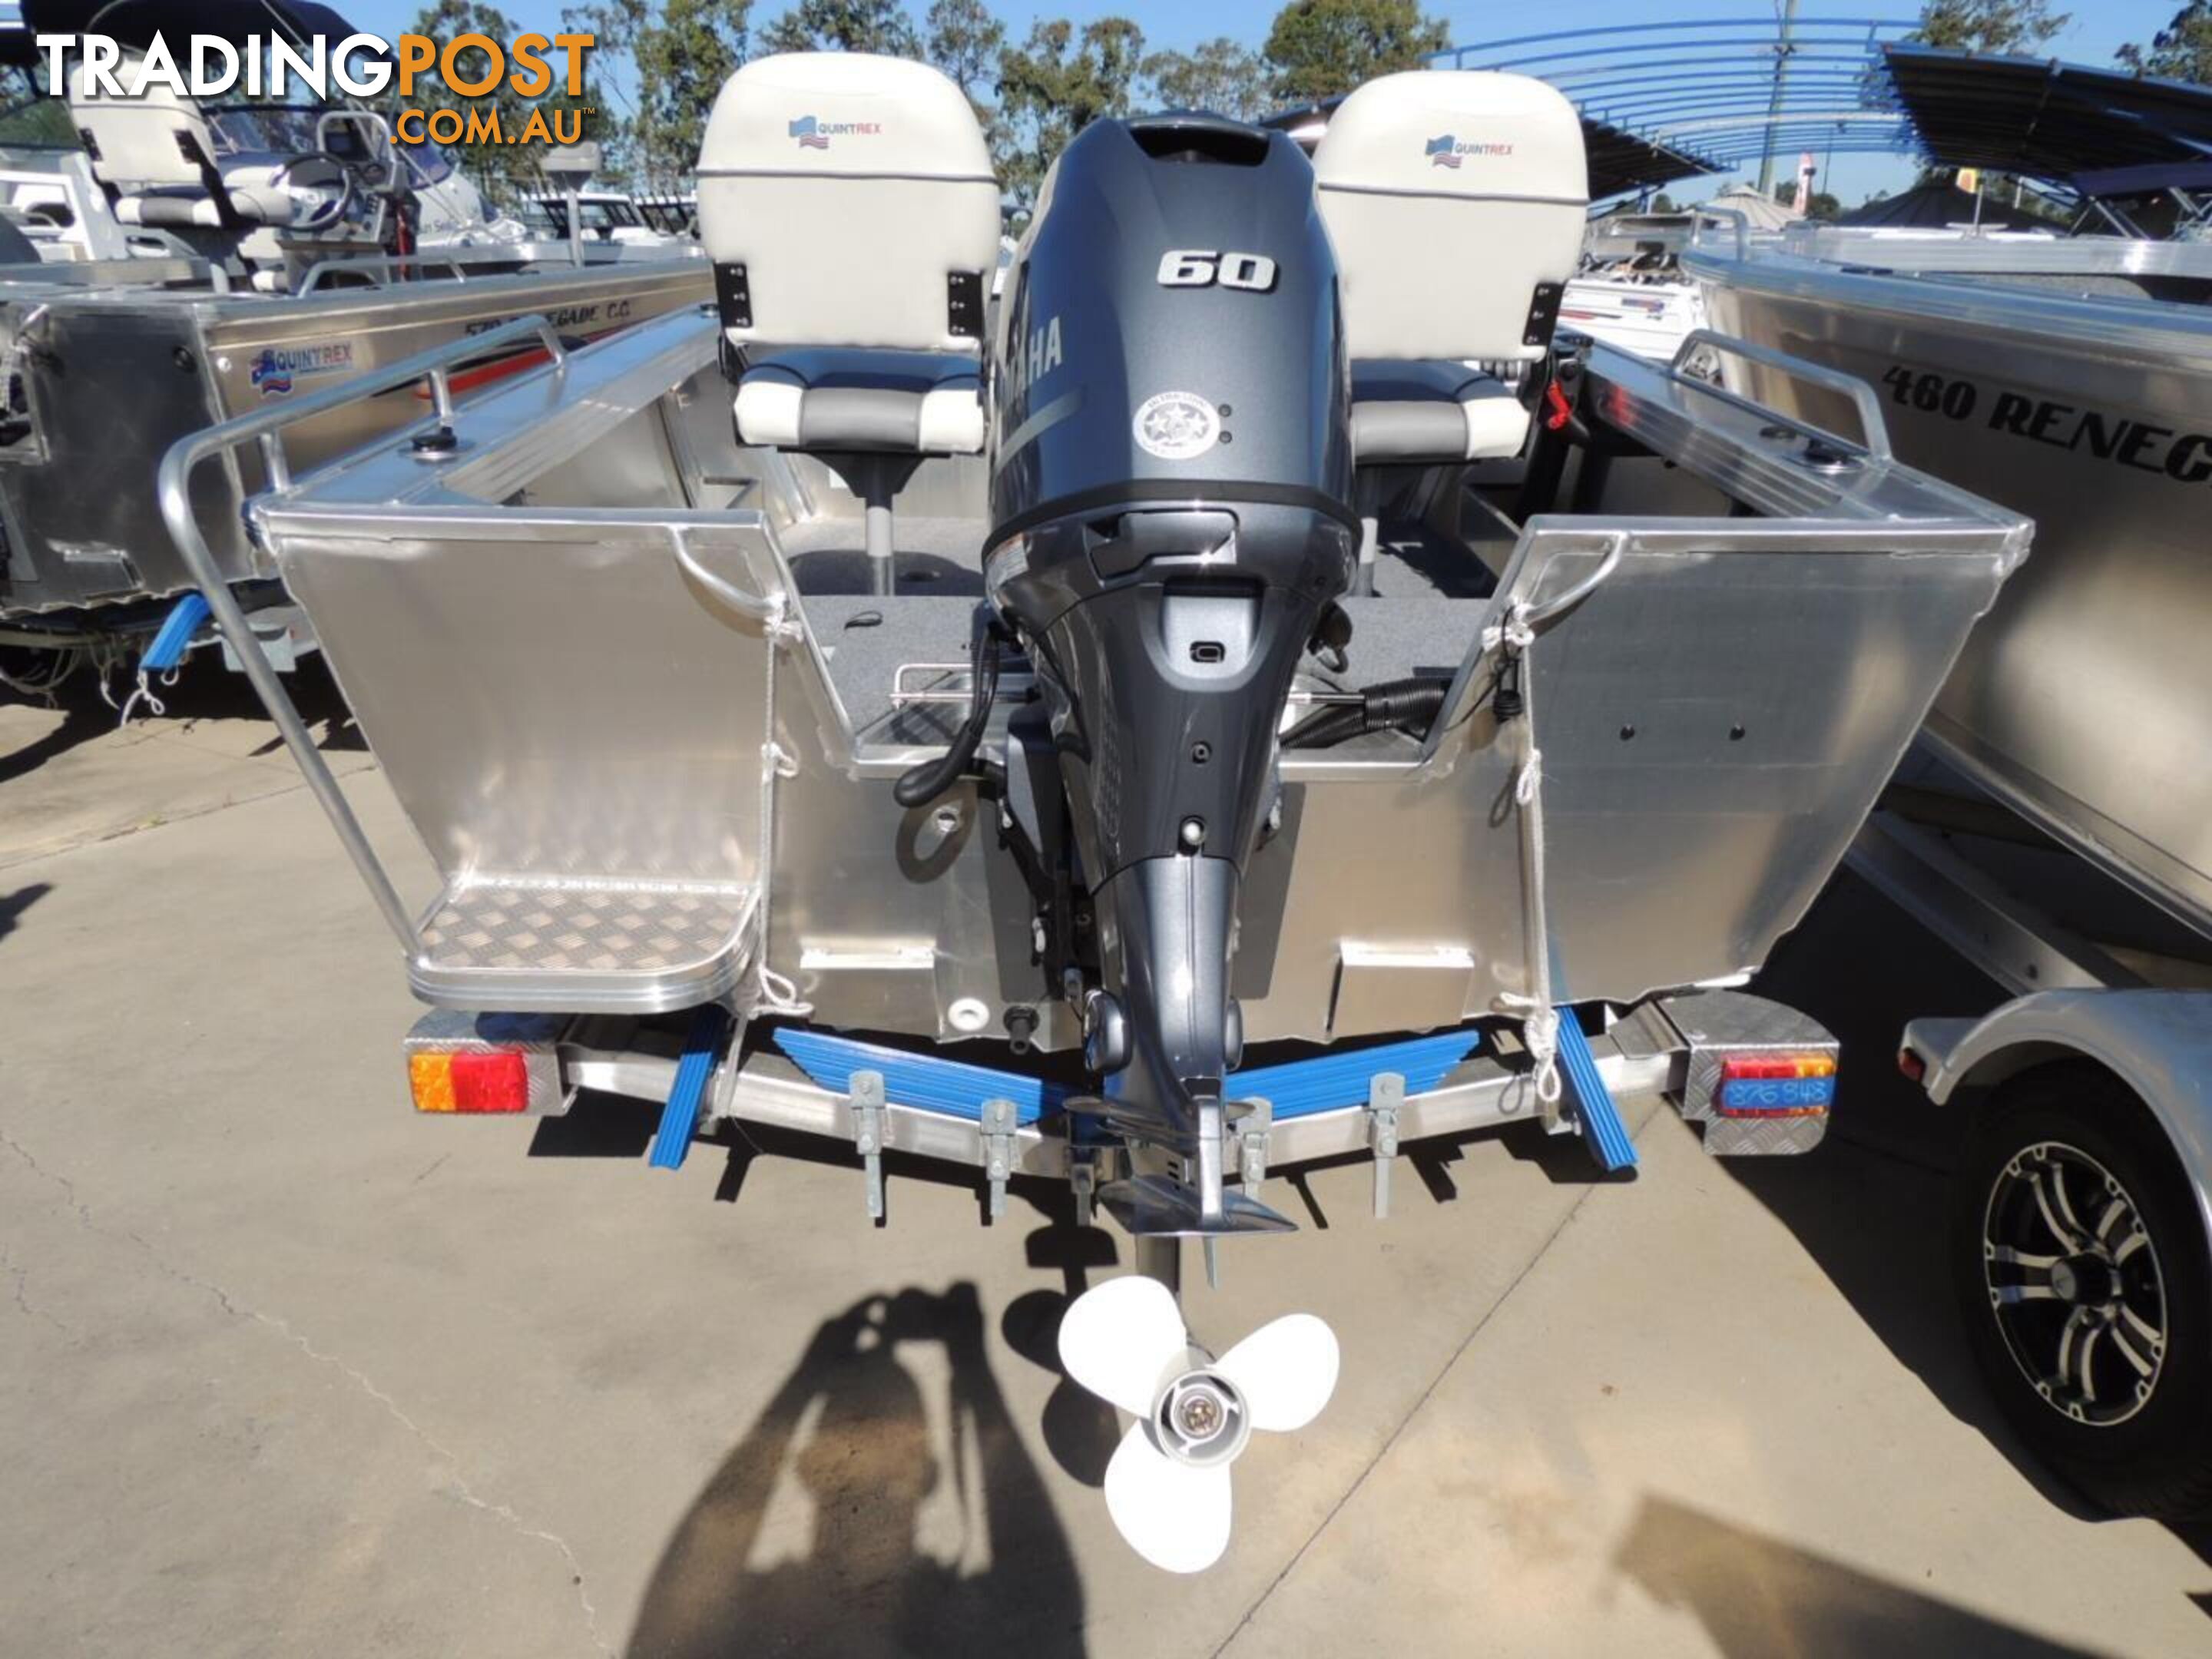 Quintrex 440 Renegade SC(Side Console) + Yamaha F60hp 4-stroke - Pack 1 for sale online prices